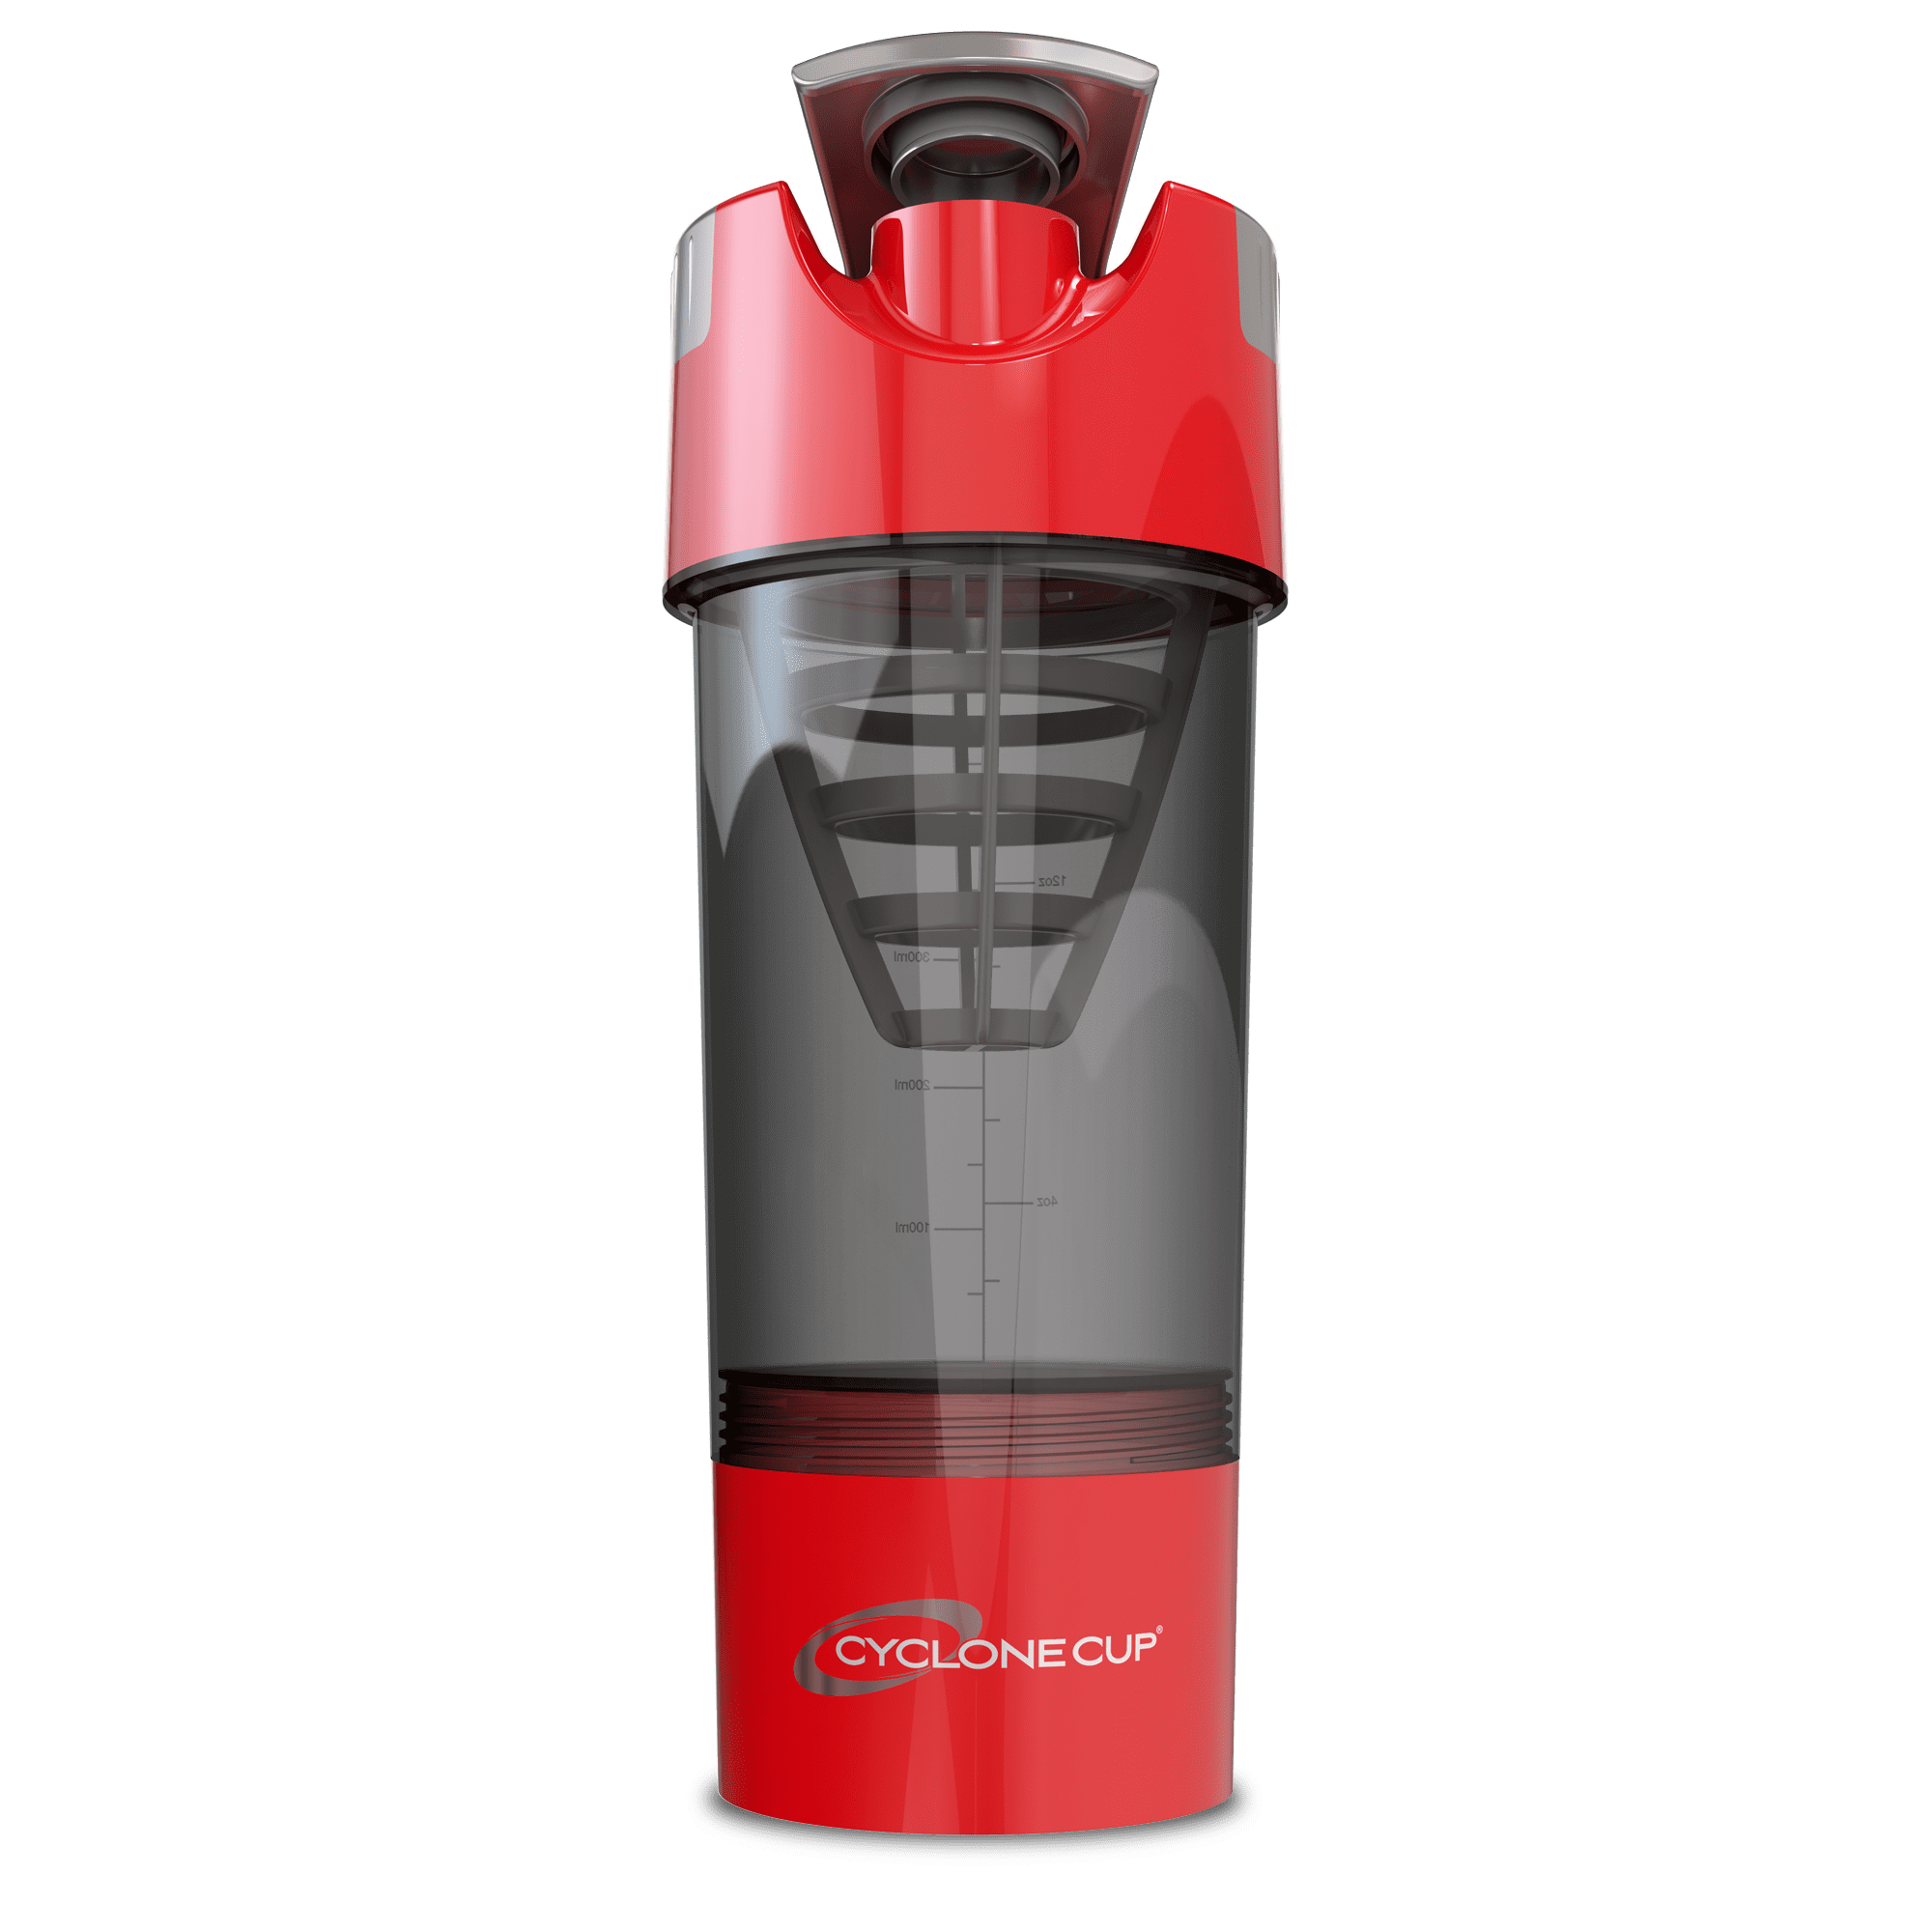 Cyclone Cup 20oz Blender Mixer Bottle Protein Shaker with Compartment, Red